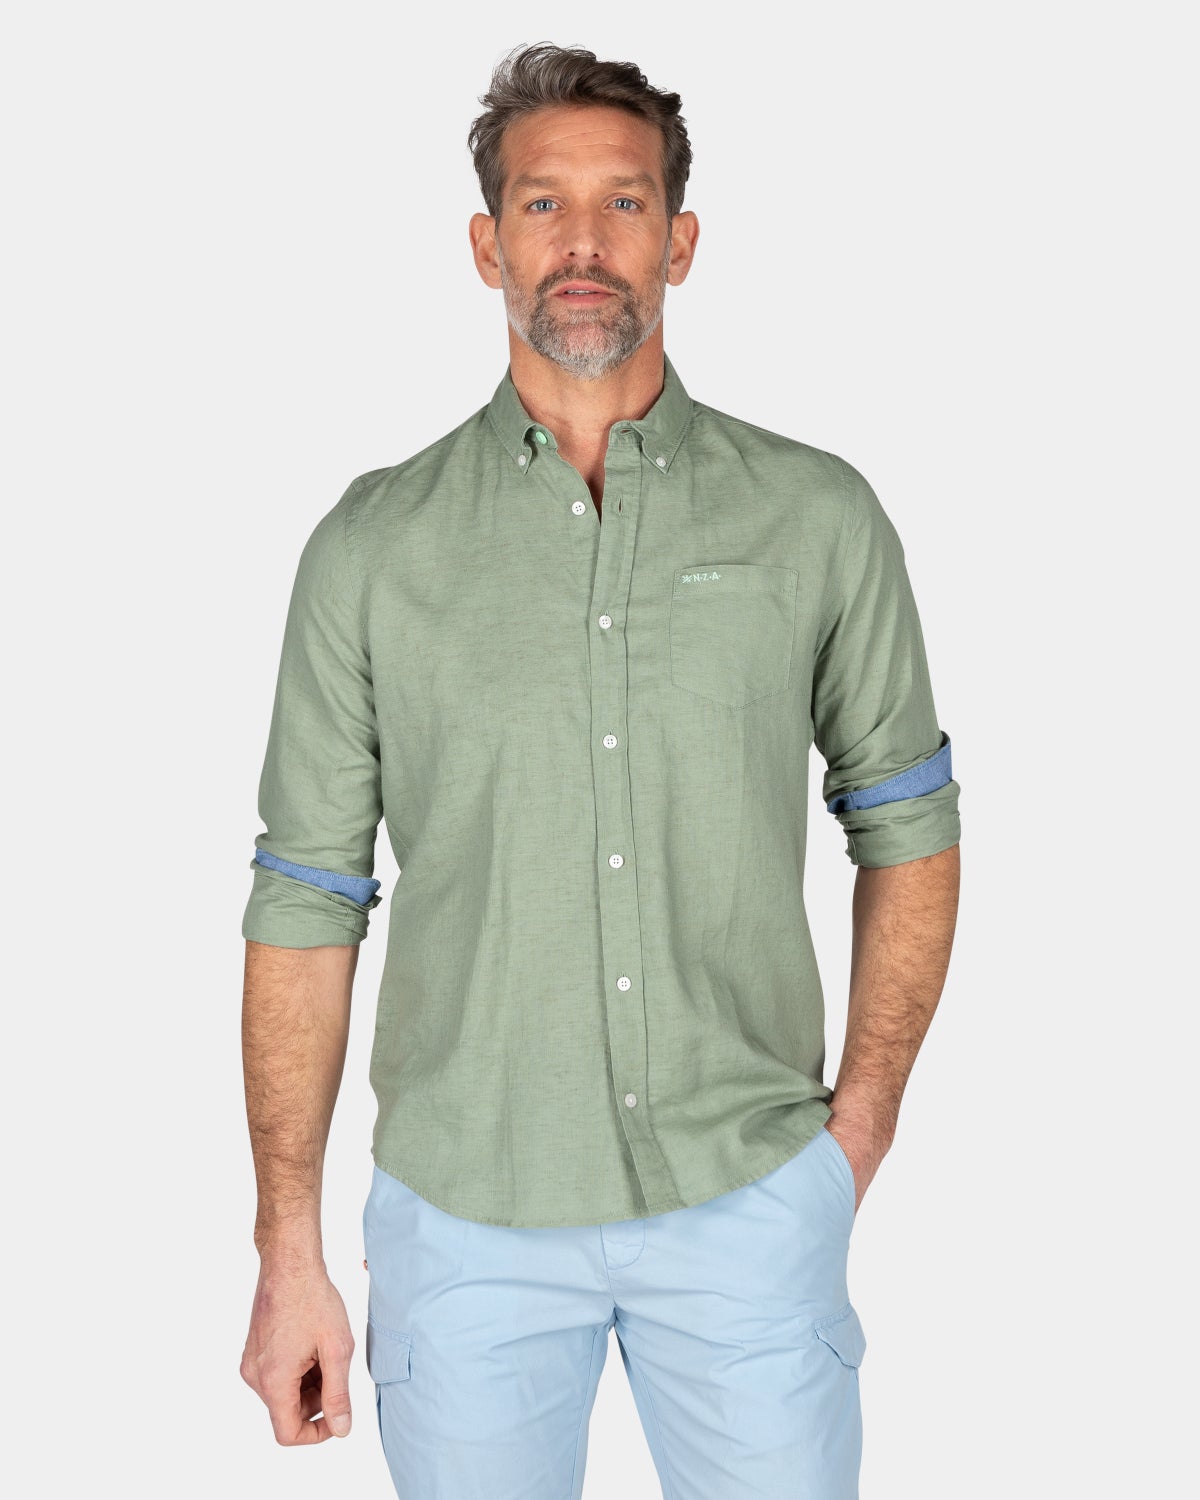 Plain linen shirt in many colors - Mellow Army